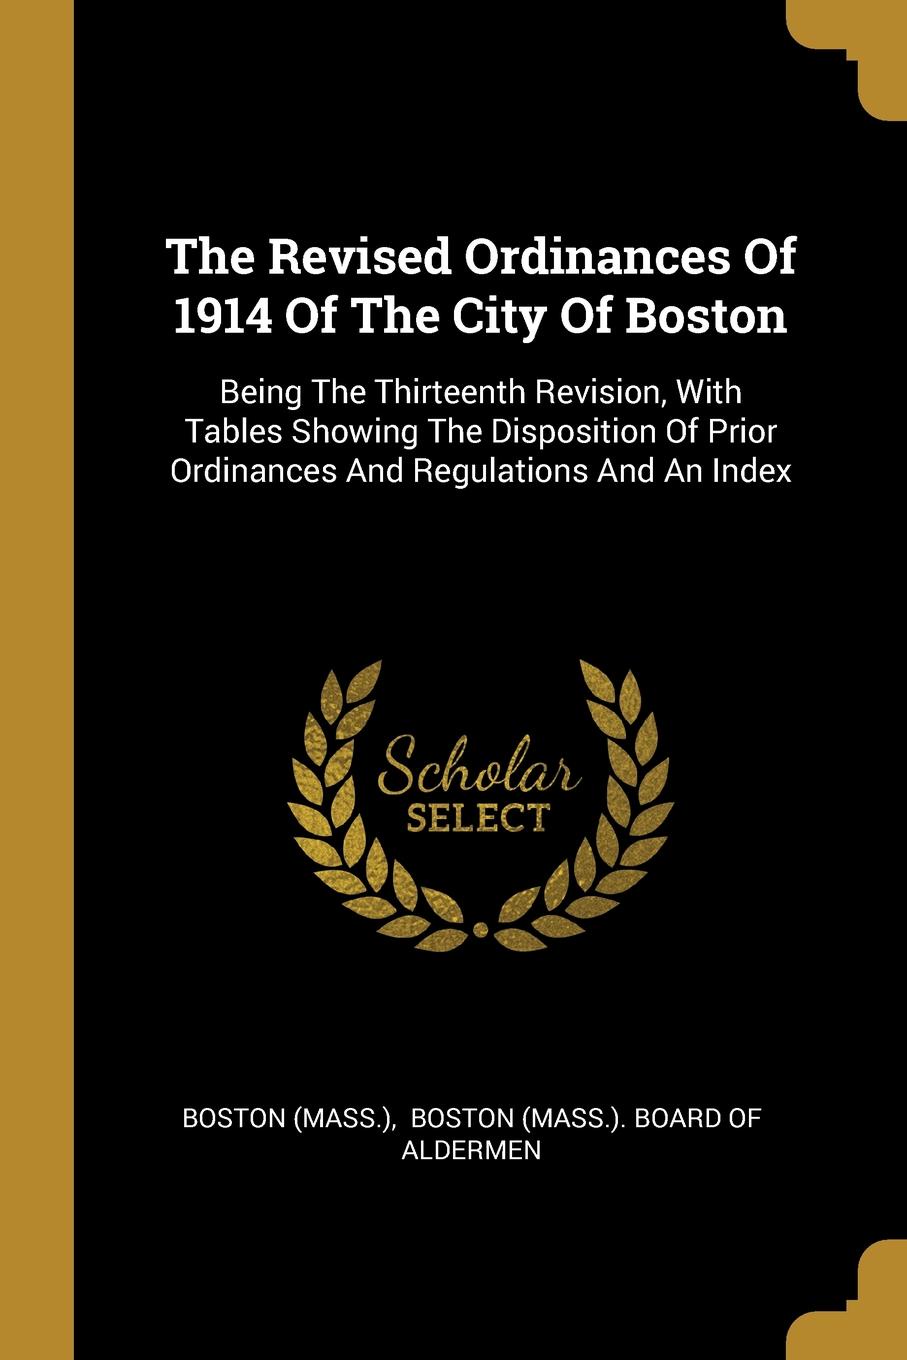 The Revised Ordinances Of 1914 Of The City Of Boston. Being The Thirteenth Revision, With Tables Showing The Disposition Of Prior Ordinances And Regulations And An Index